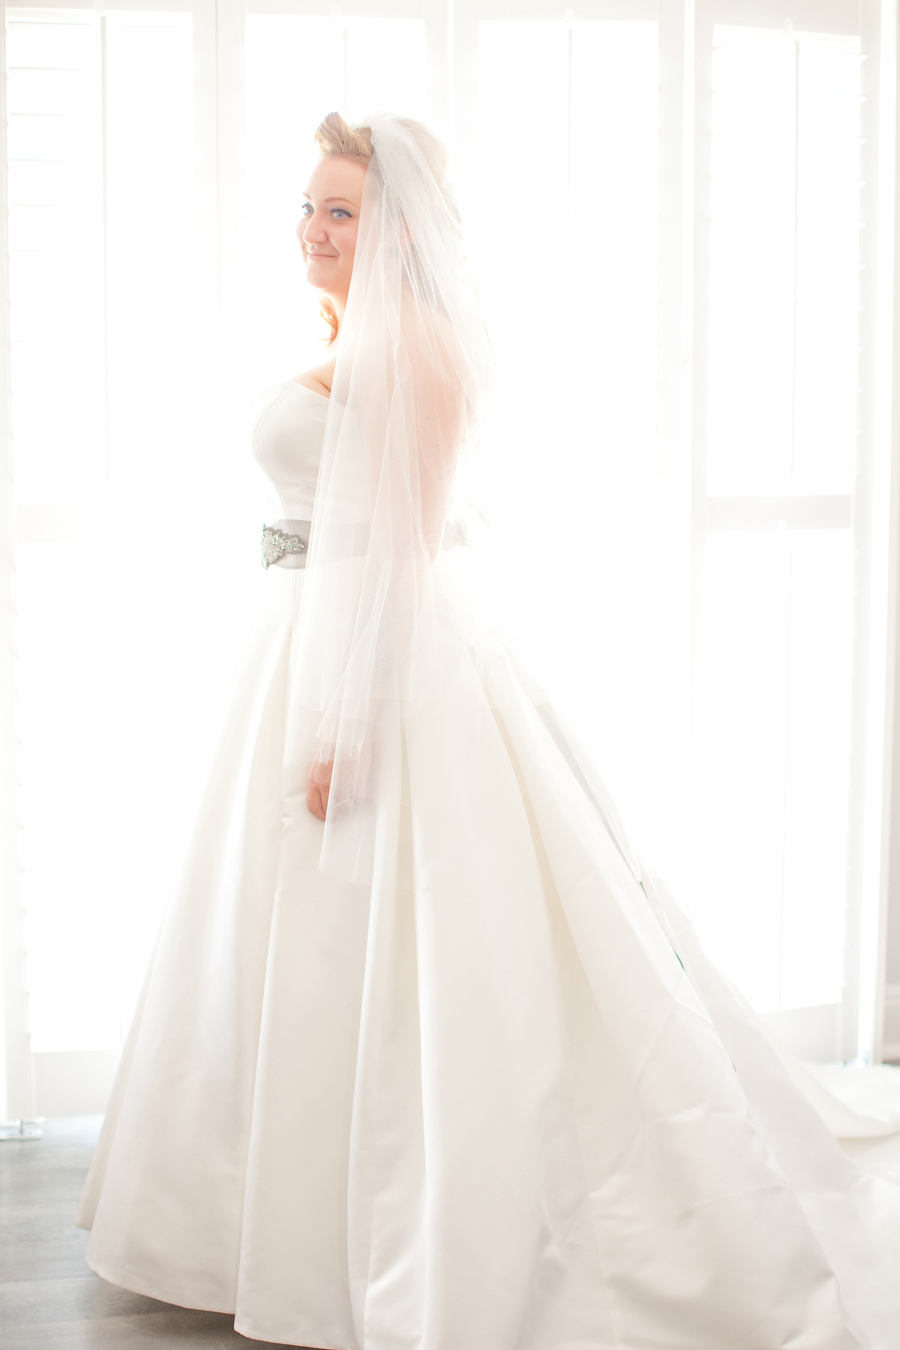 A bridal portrait next to the window at Willow Heights Mansion.